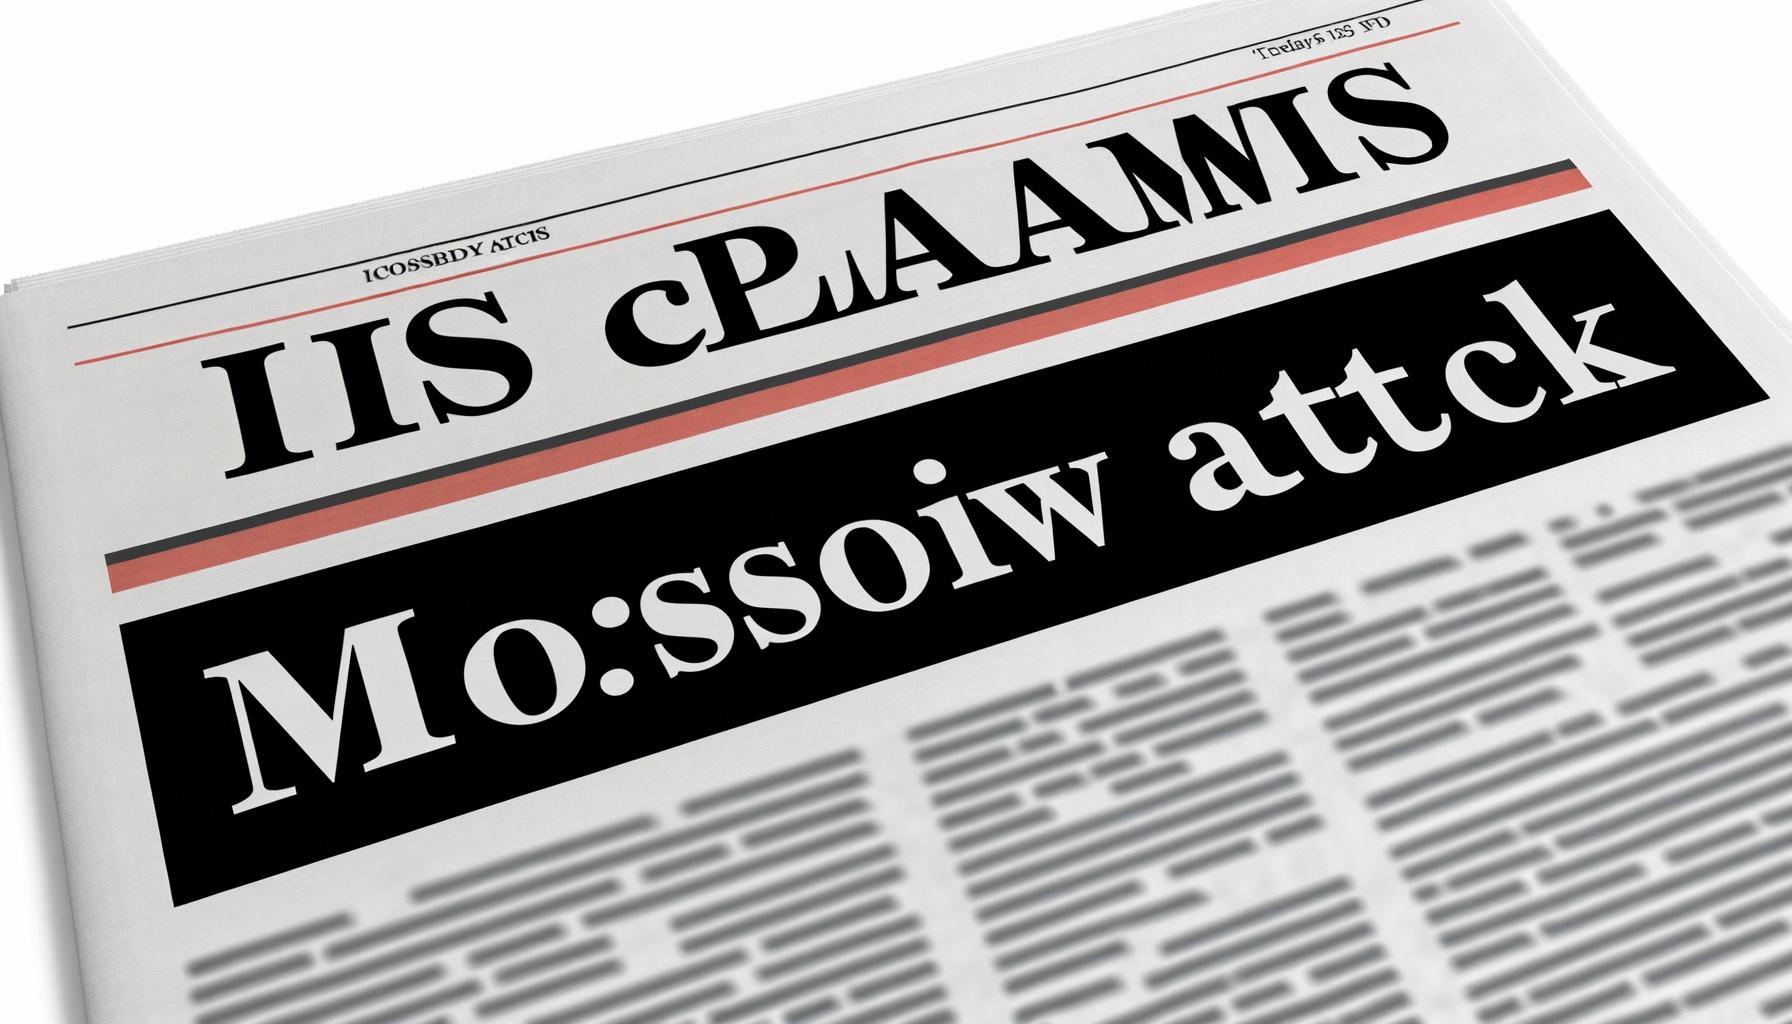 IS claims responsibility for Moscow attack Balanced News